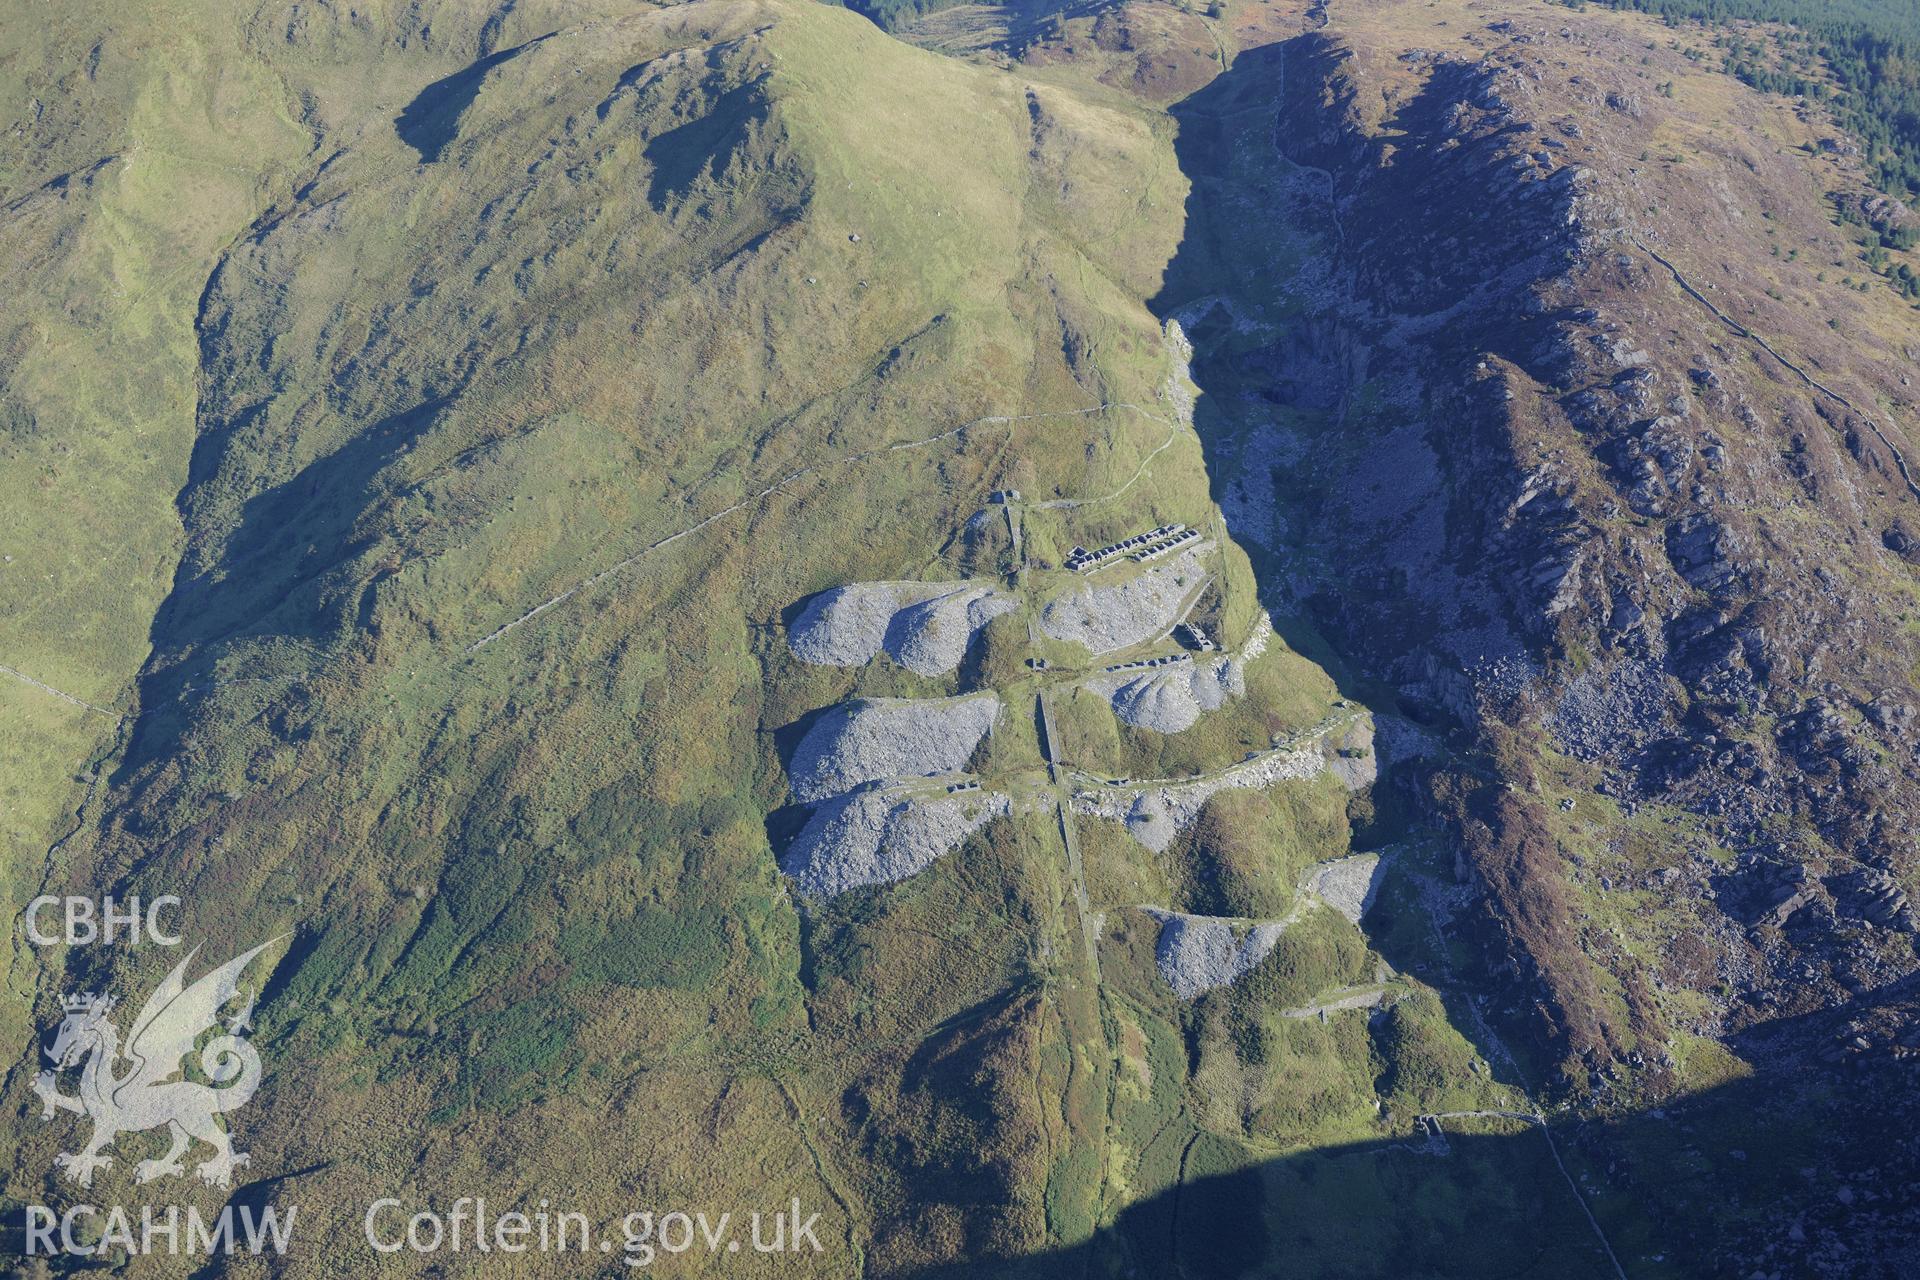 Workshop and barracks at Prince of Wales slate mine, near Beddgelert. Oblique aerial photograph taken during the Royal Commission's programme of archaeological aerial reconnaissance by Toby Driver on 2nd October 2015.